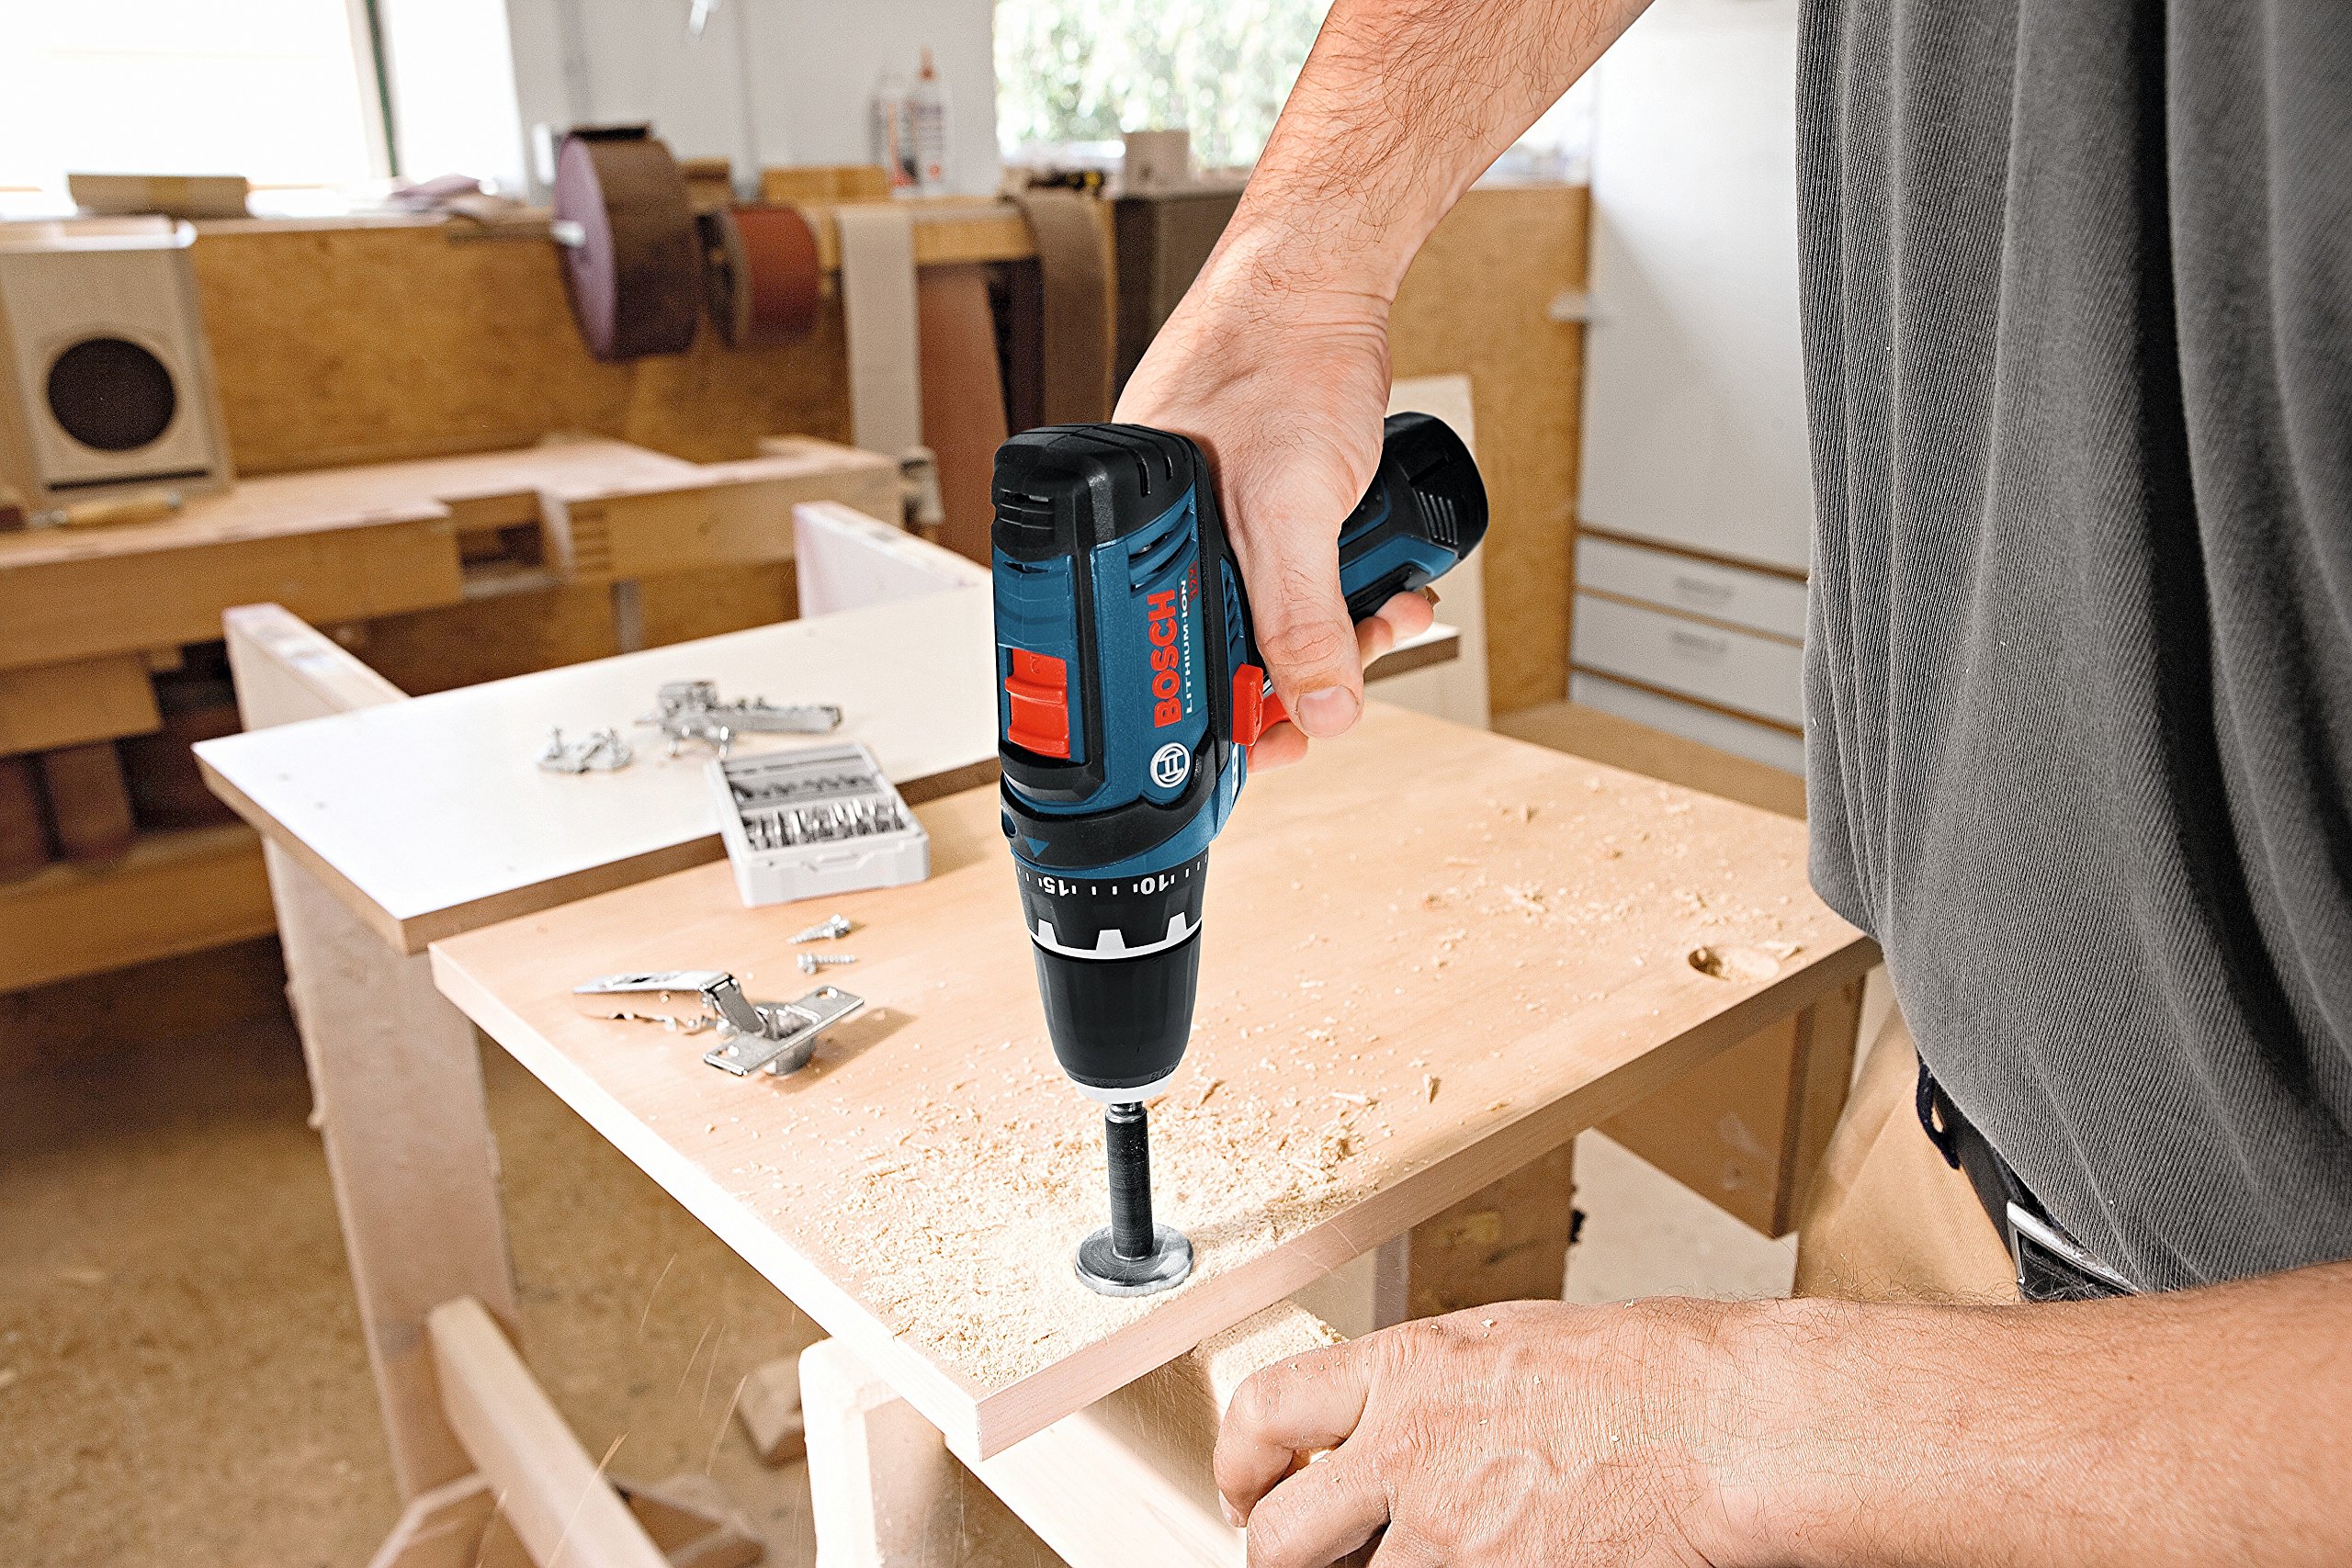 BOSCH Power Tools Combo Kit GXL12V-310B22 - 12V Max 3-Tool Set with 3/8 In. Drill/Driver, Pocket Reciprocating Saw and LED Worklight